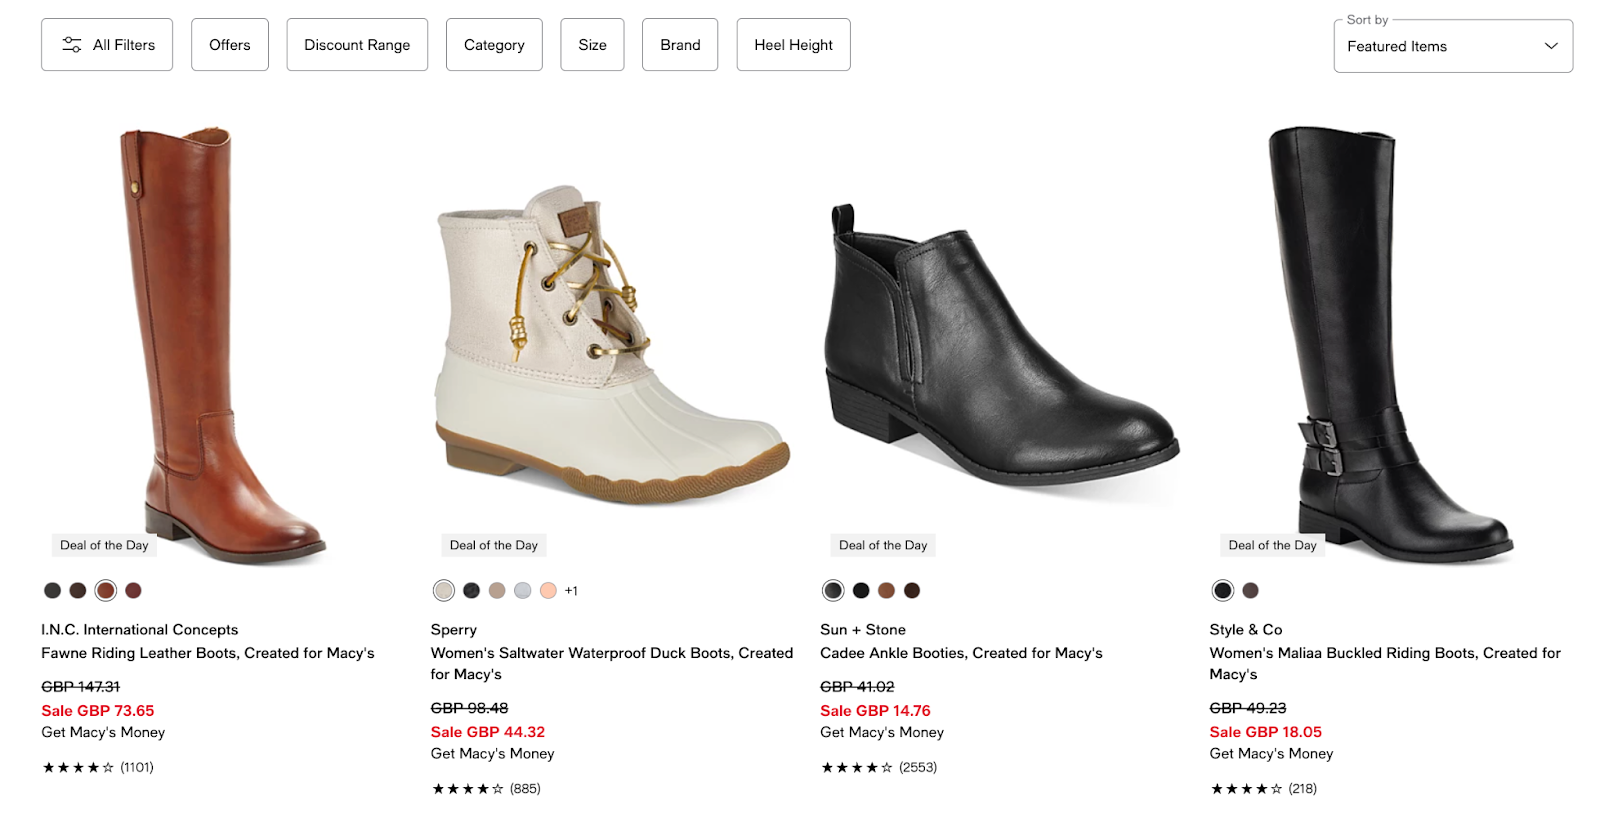 Screenshot from Macy’s showing different brand options of boots side by side.